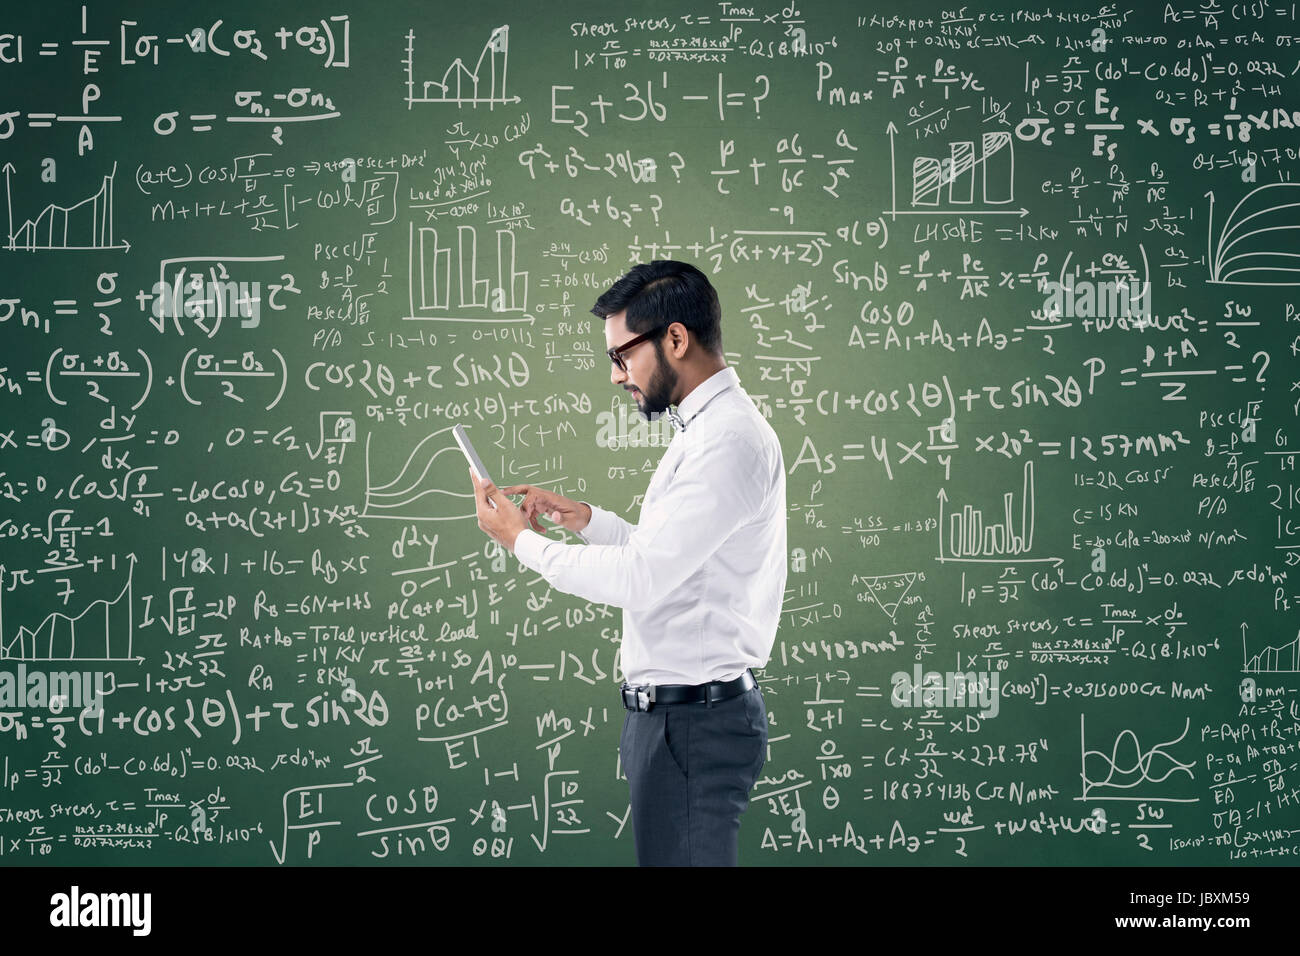 Young Businessman Holding Digital Tablet In Front Of Chalkboard With Mathematical Formula Stock Photo Alamy